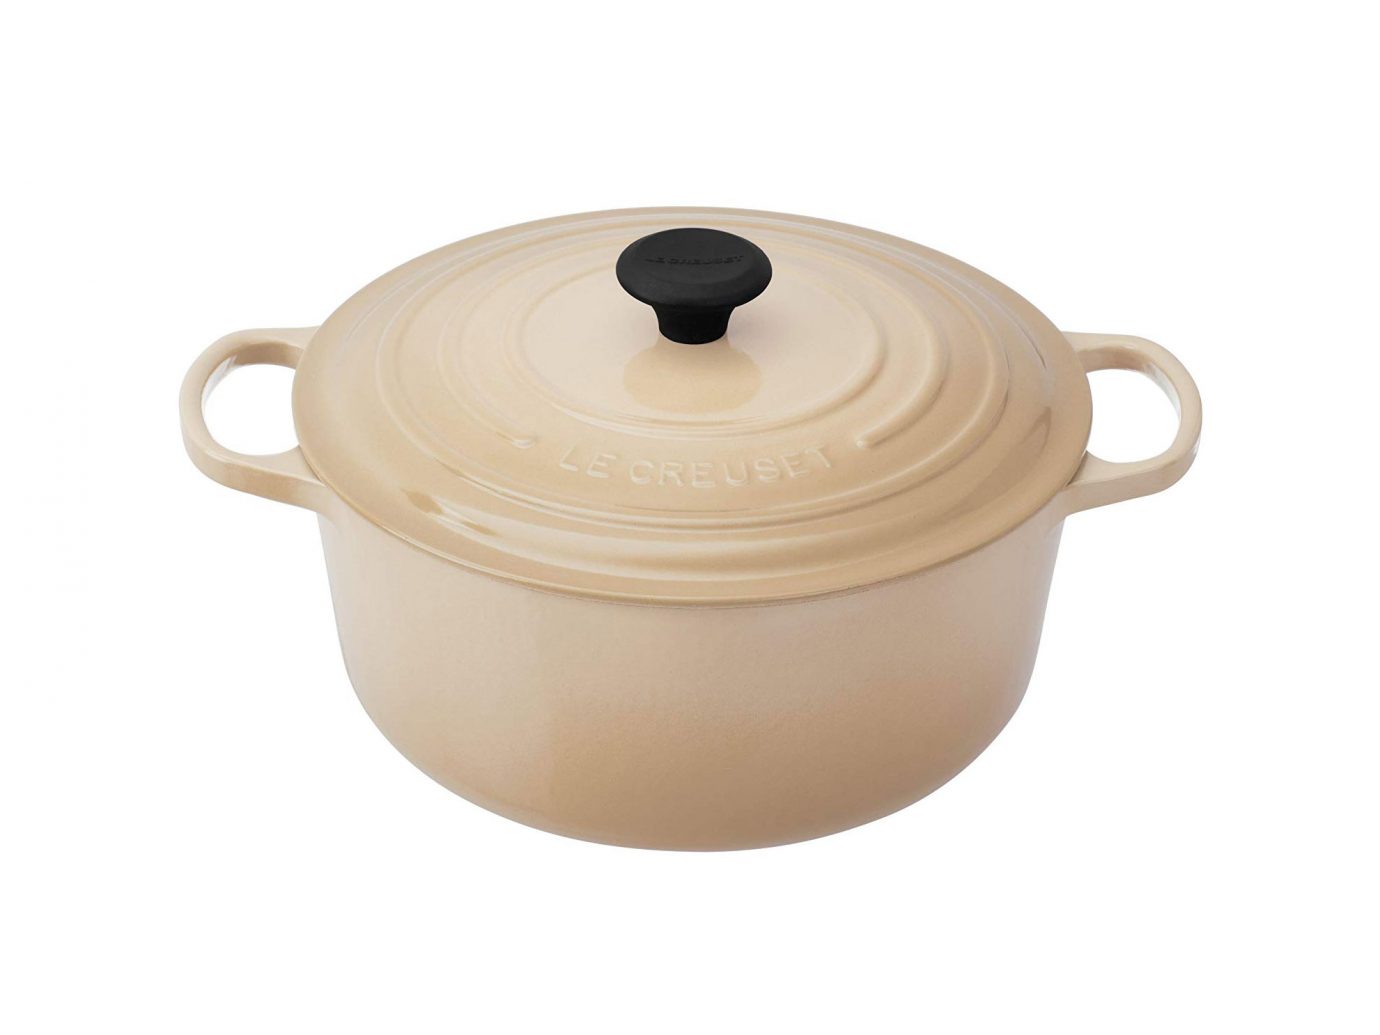 Le Creuset Signature Enameled Cast-Iron French Oven